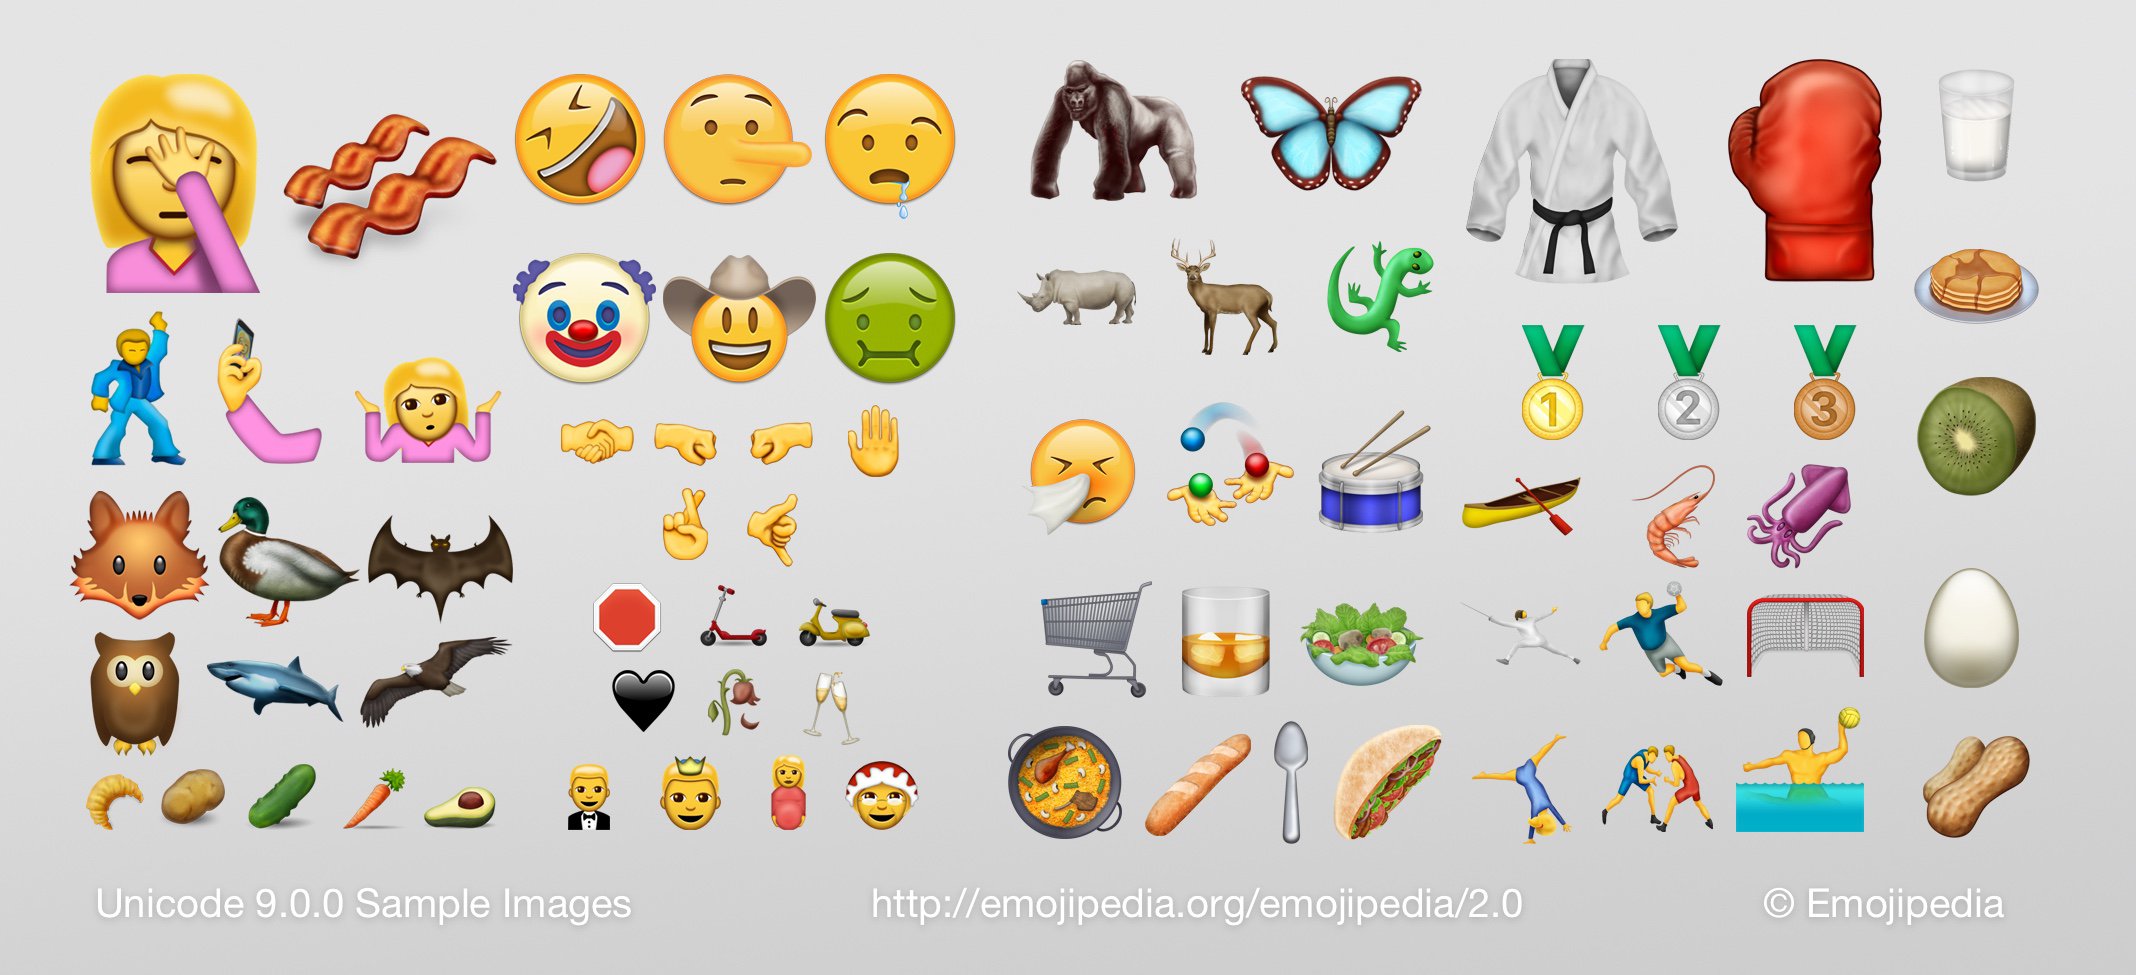 Selfie, Shrug, ROFL, Face Palm, Whiskey, Clowns and more among new emoji  arriving in June | TechCrunch